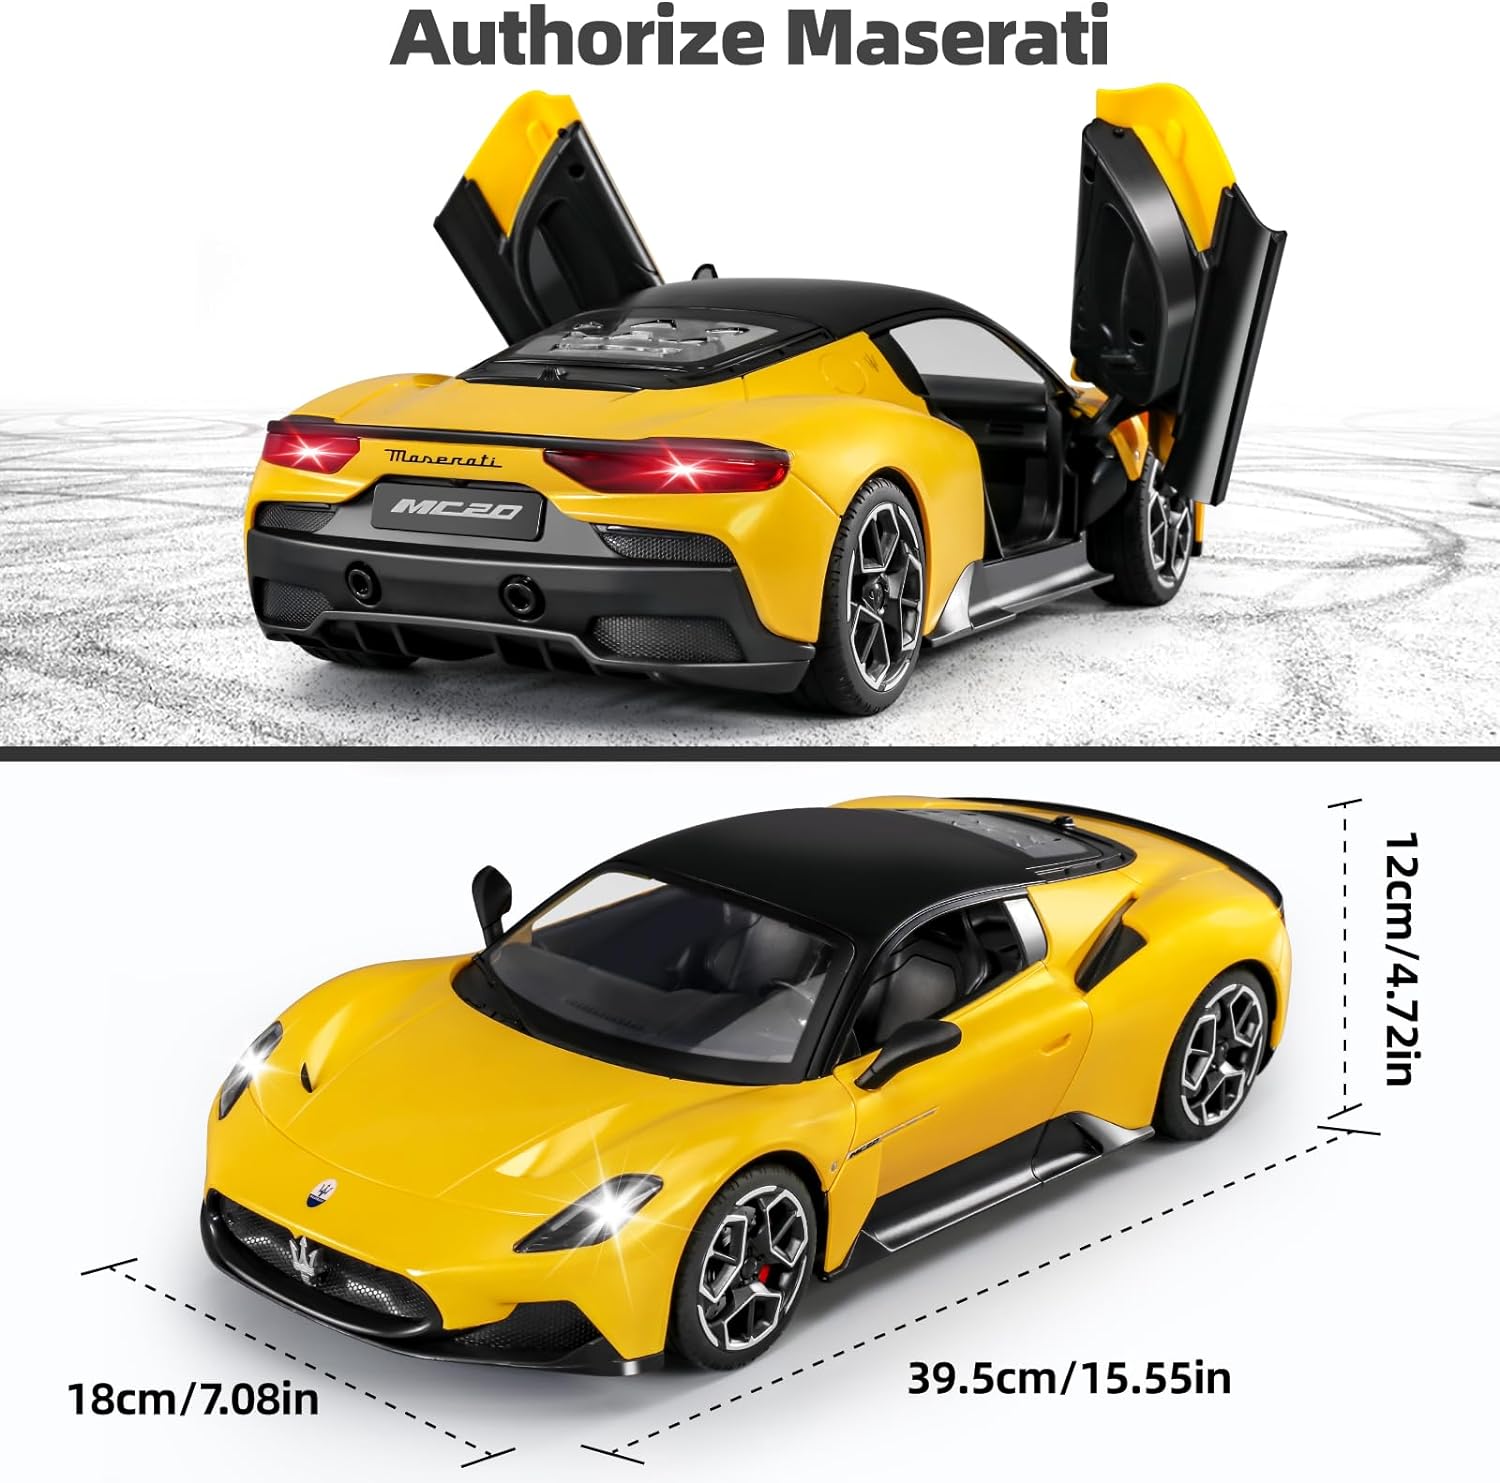 MIEBELY Maserati Drifting RC Cars Remote Control